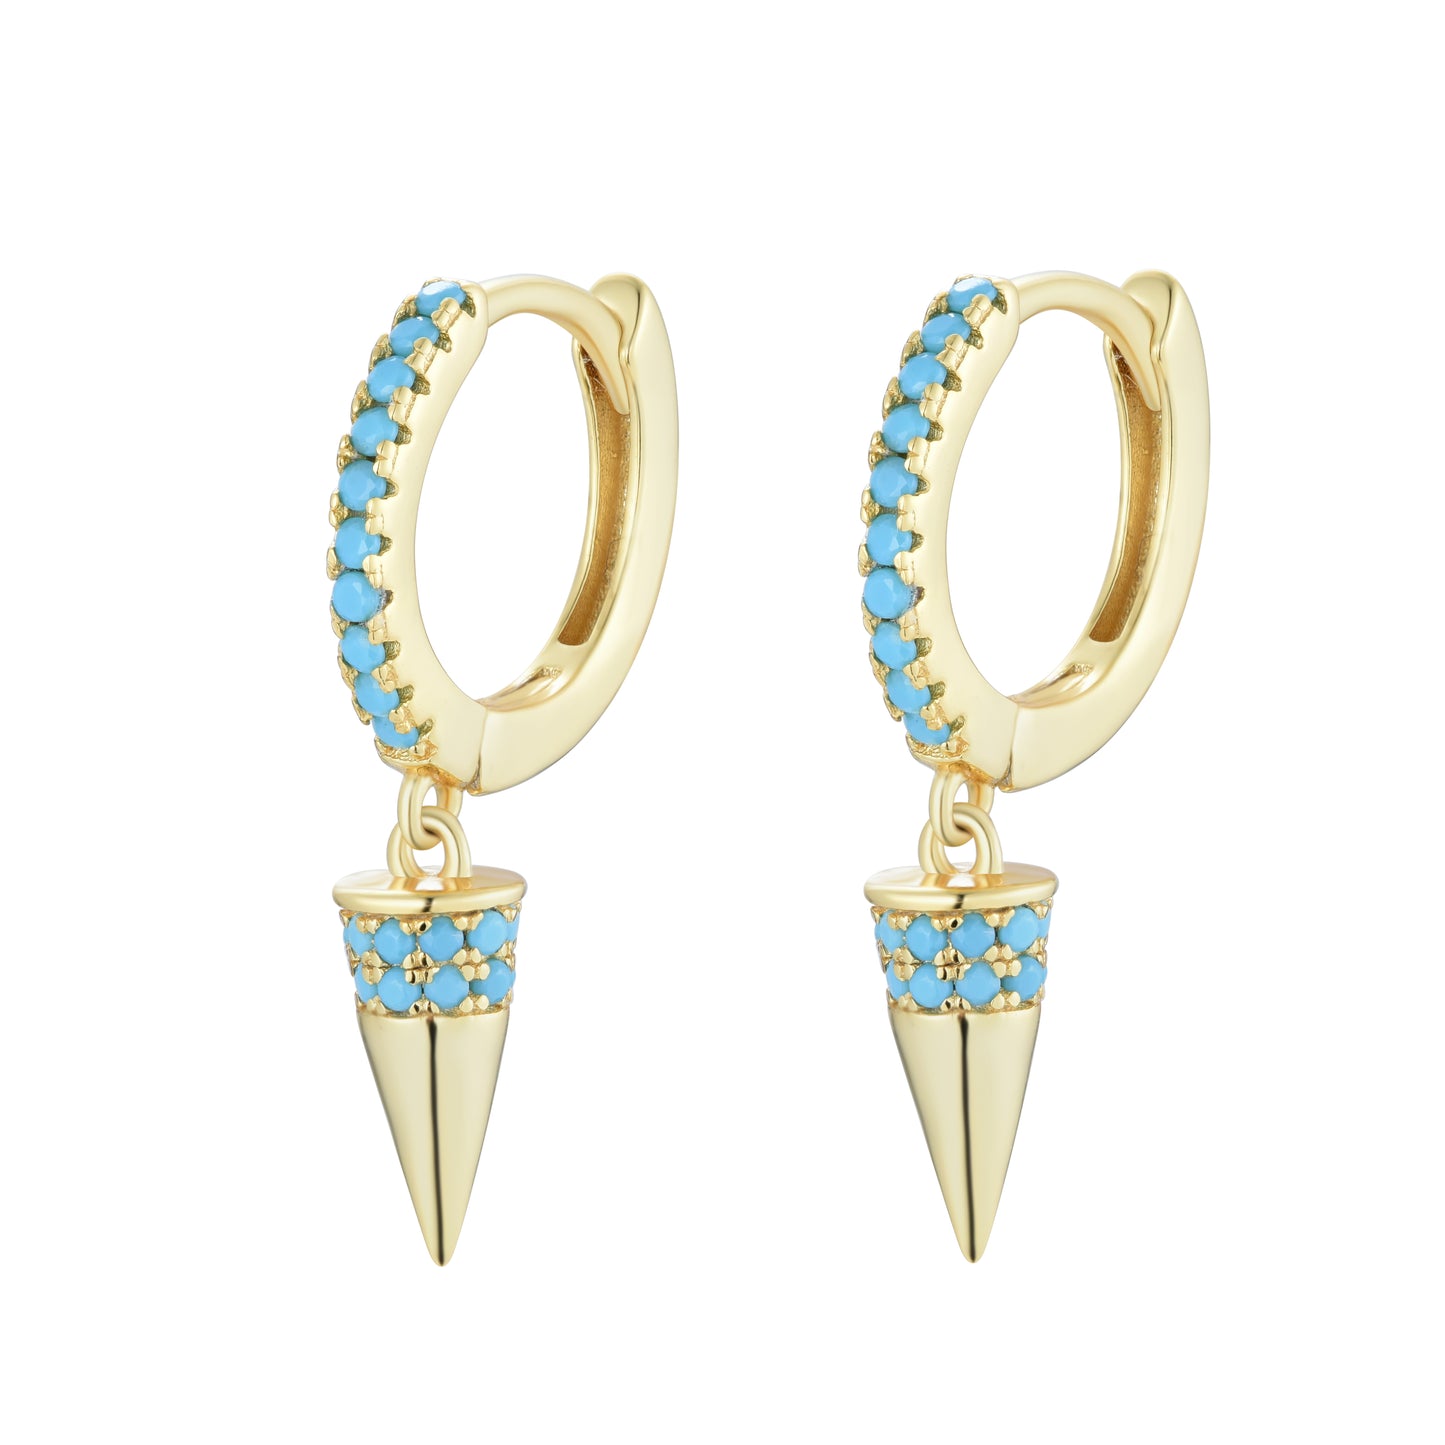 EG-36/R/TUR - Hoop Earrings with Hanging Cone Decorated with Turquoise